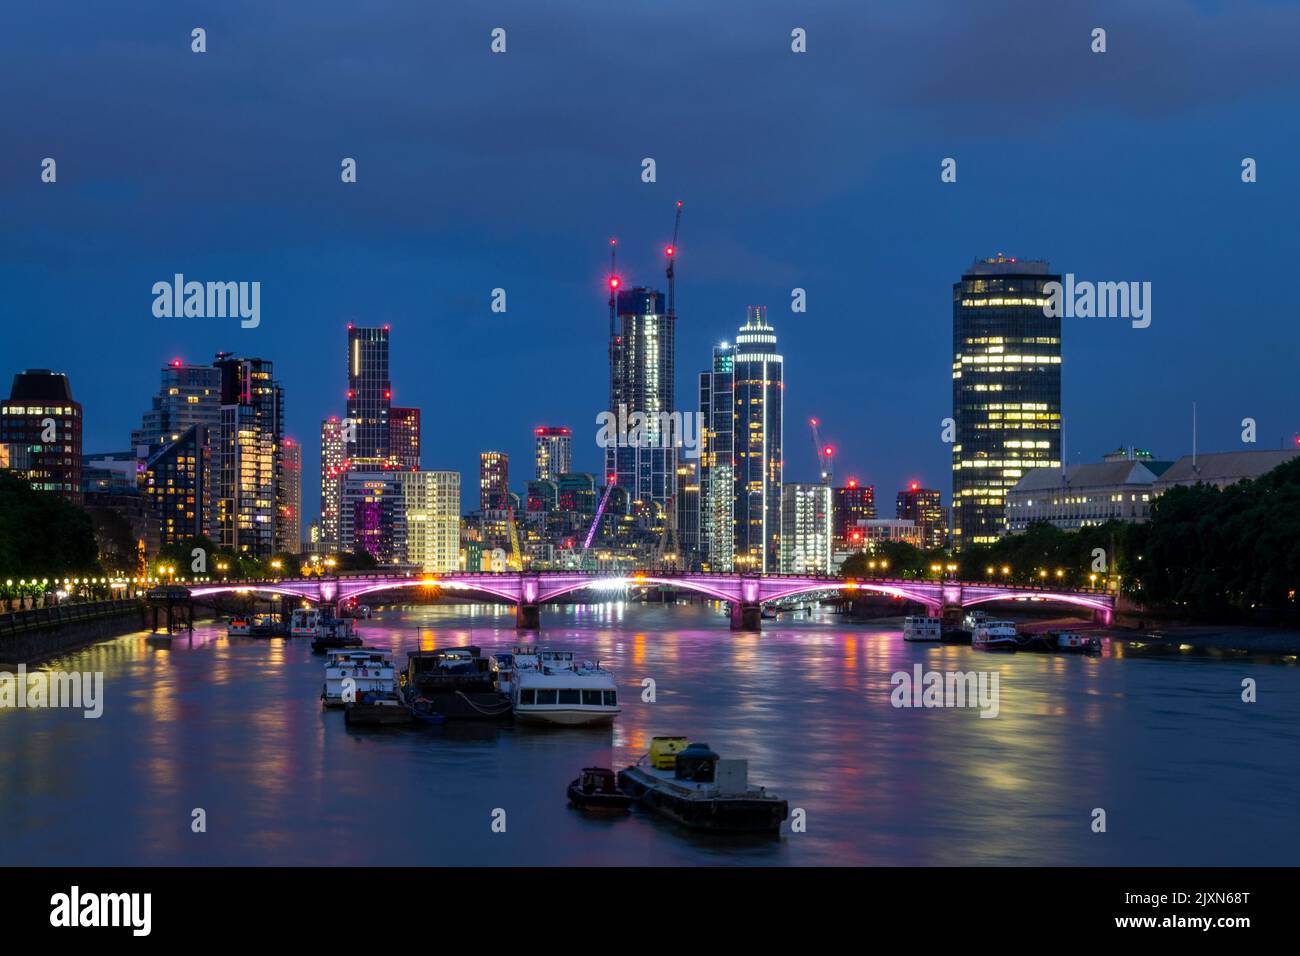 Lambeth bridge over river Thames and the slyline of Vauxhall district with modern buildings and towers illuminated at night in South London, UK Stock Photo